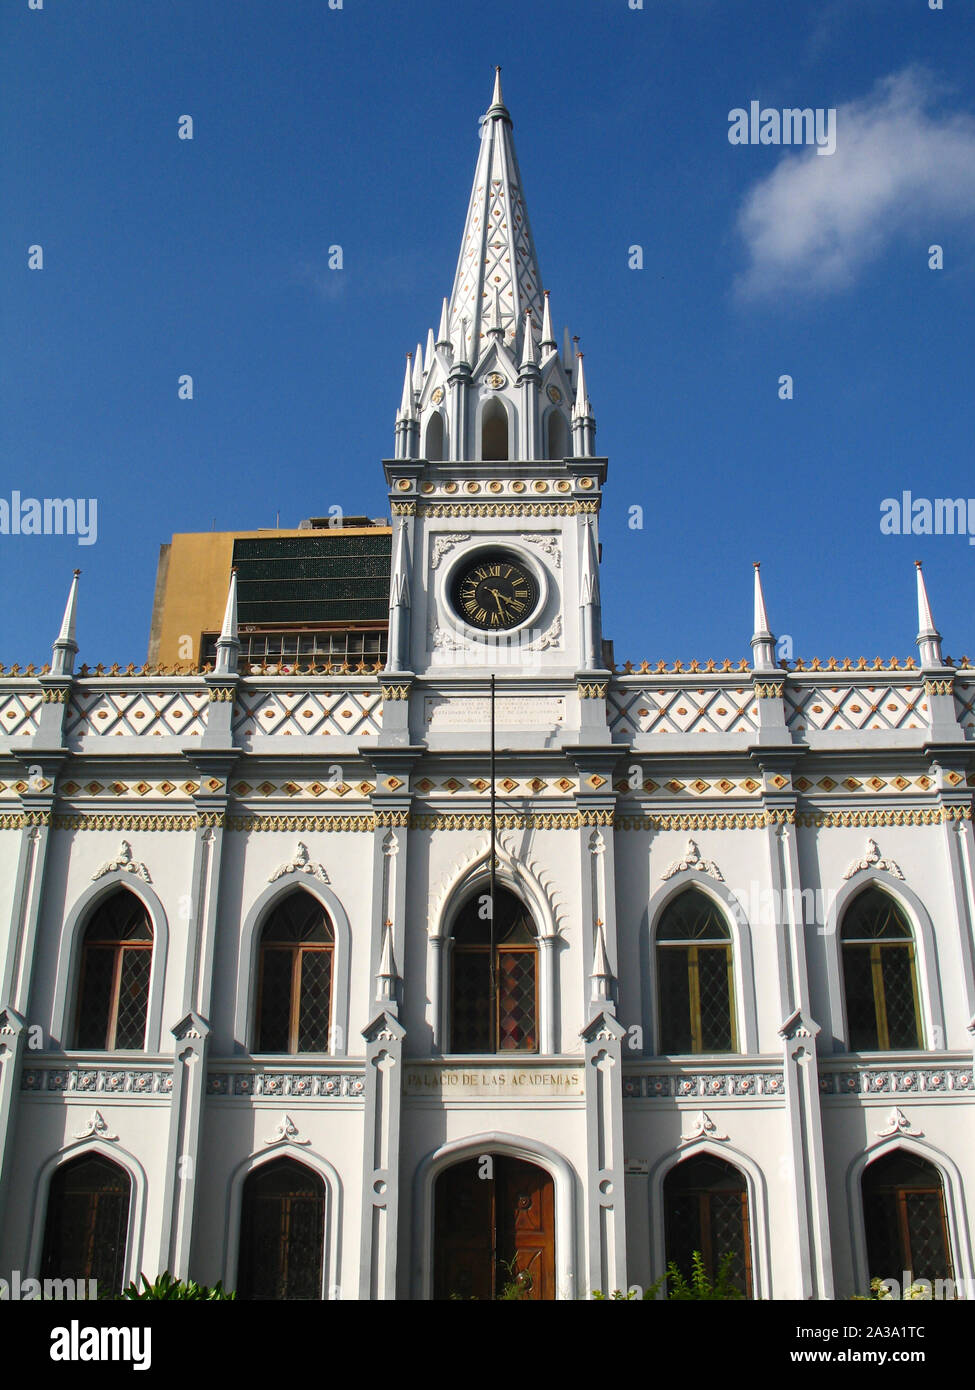 Palace of the Academies neo gothic building in downtown Caracas historic centre Venezuela former central university Stock Photo